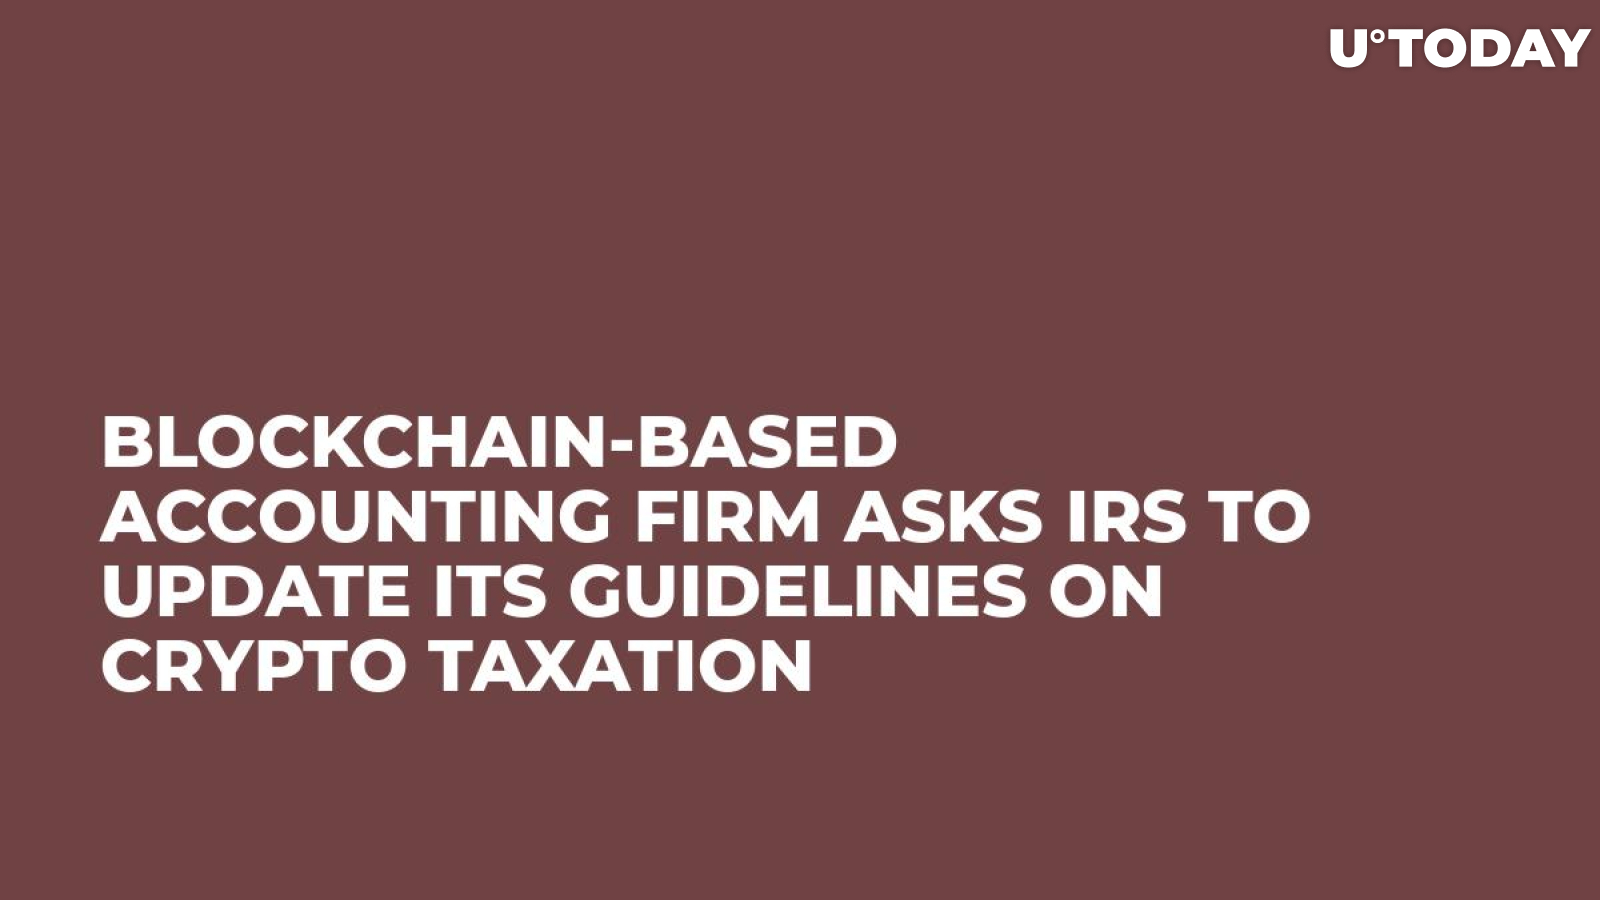 Blockchain-Based Accounting Firm Asks IRS to Update Its Guidelines on Crypto Taxation 